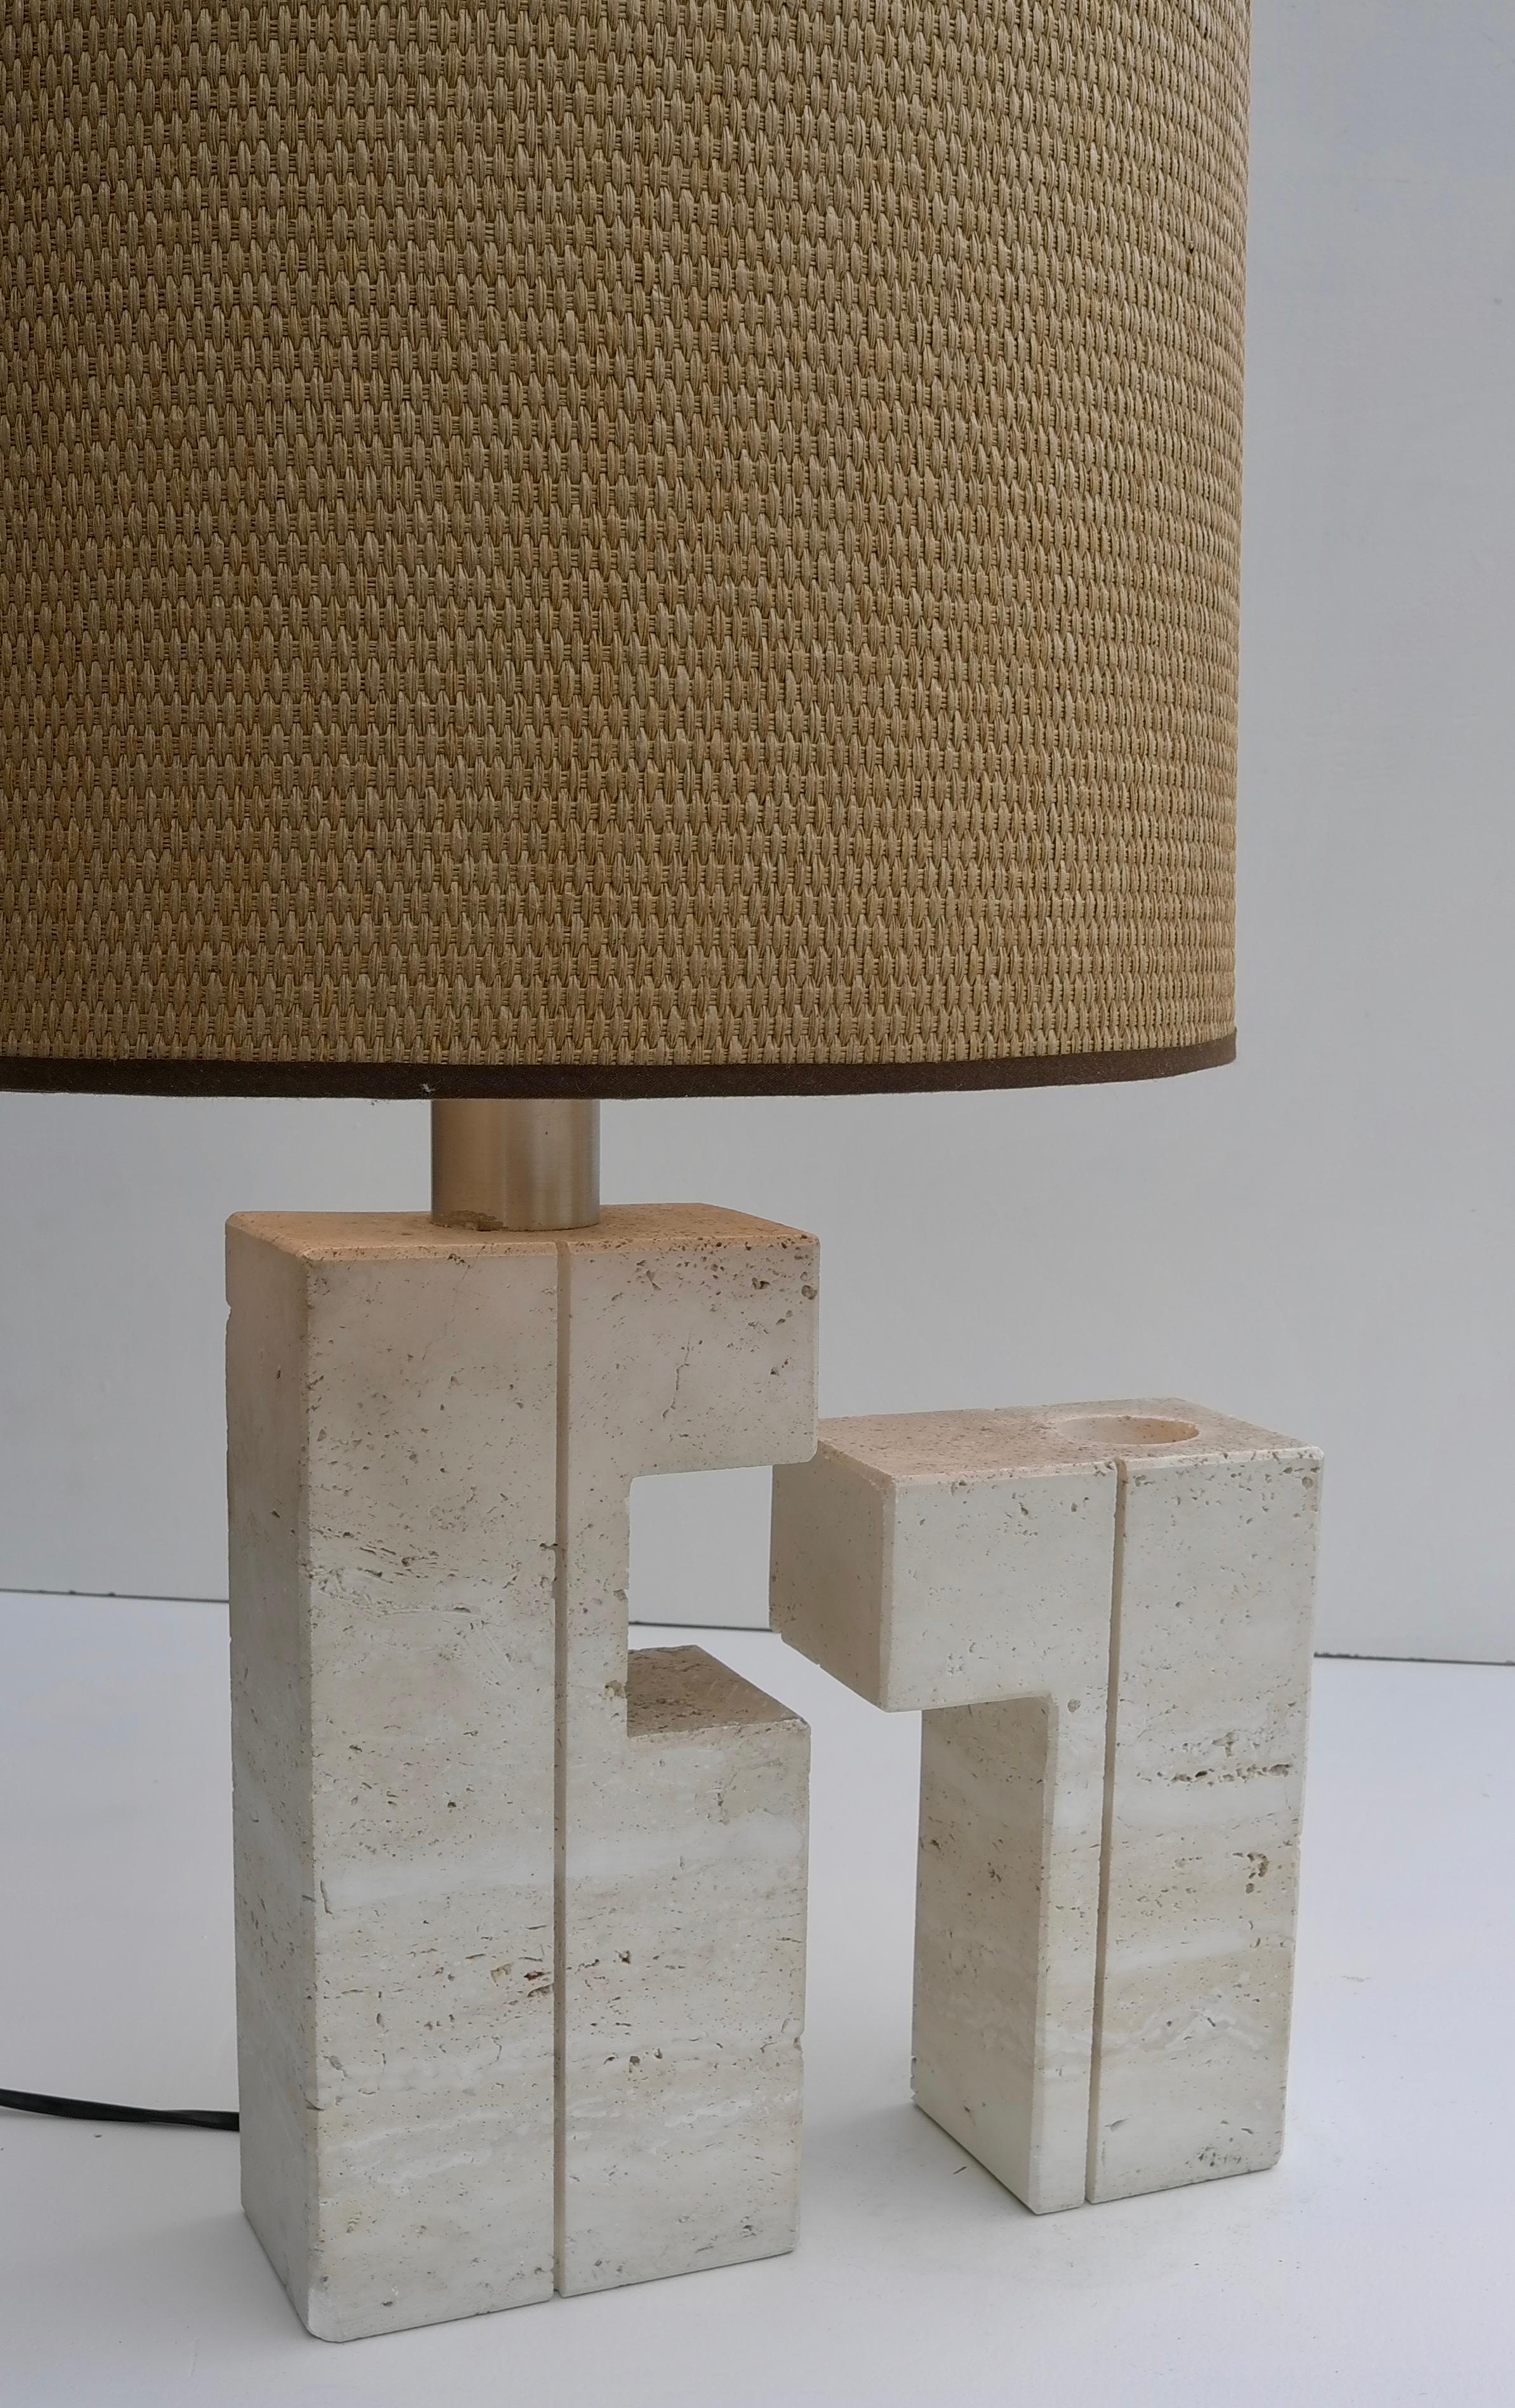 Large Sculptural Travertine Table Lamp, France 1970's In Good Condition For Sale In Den Haag, NL